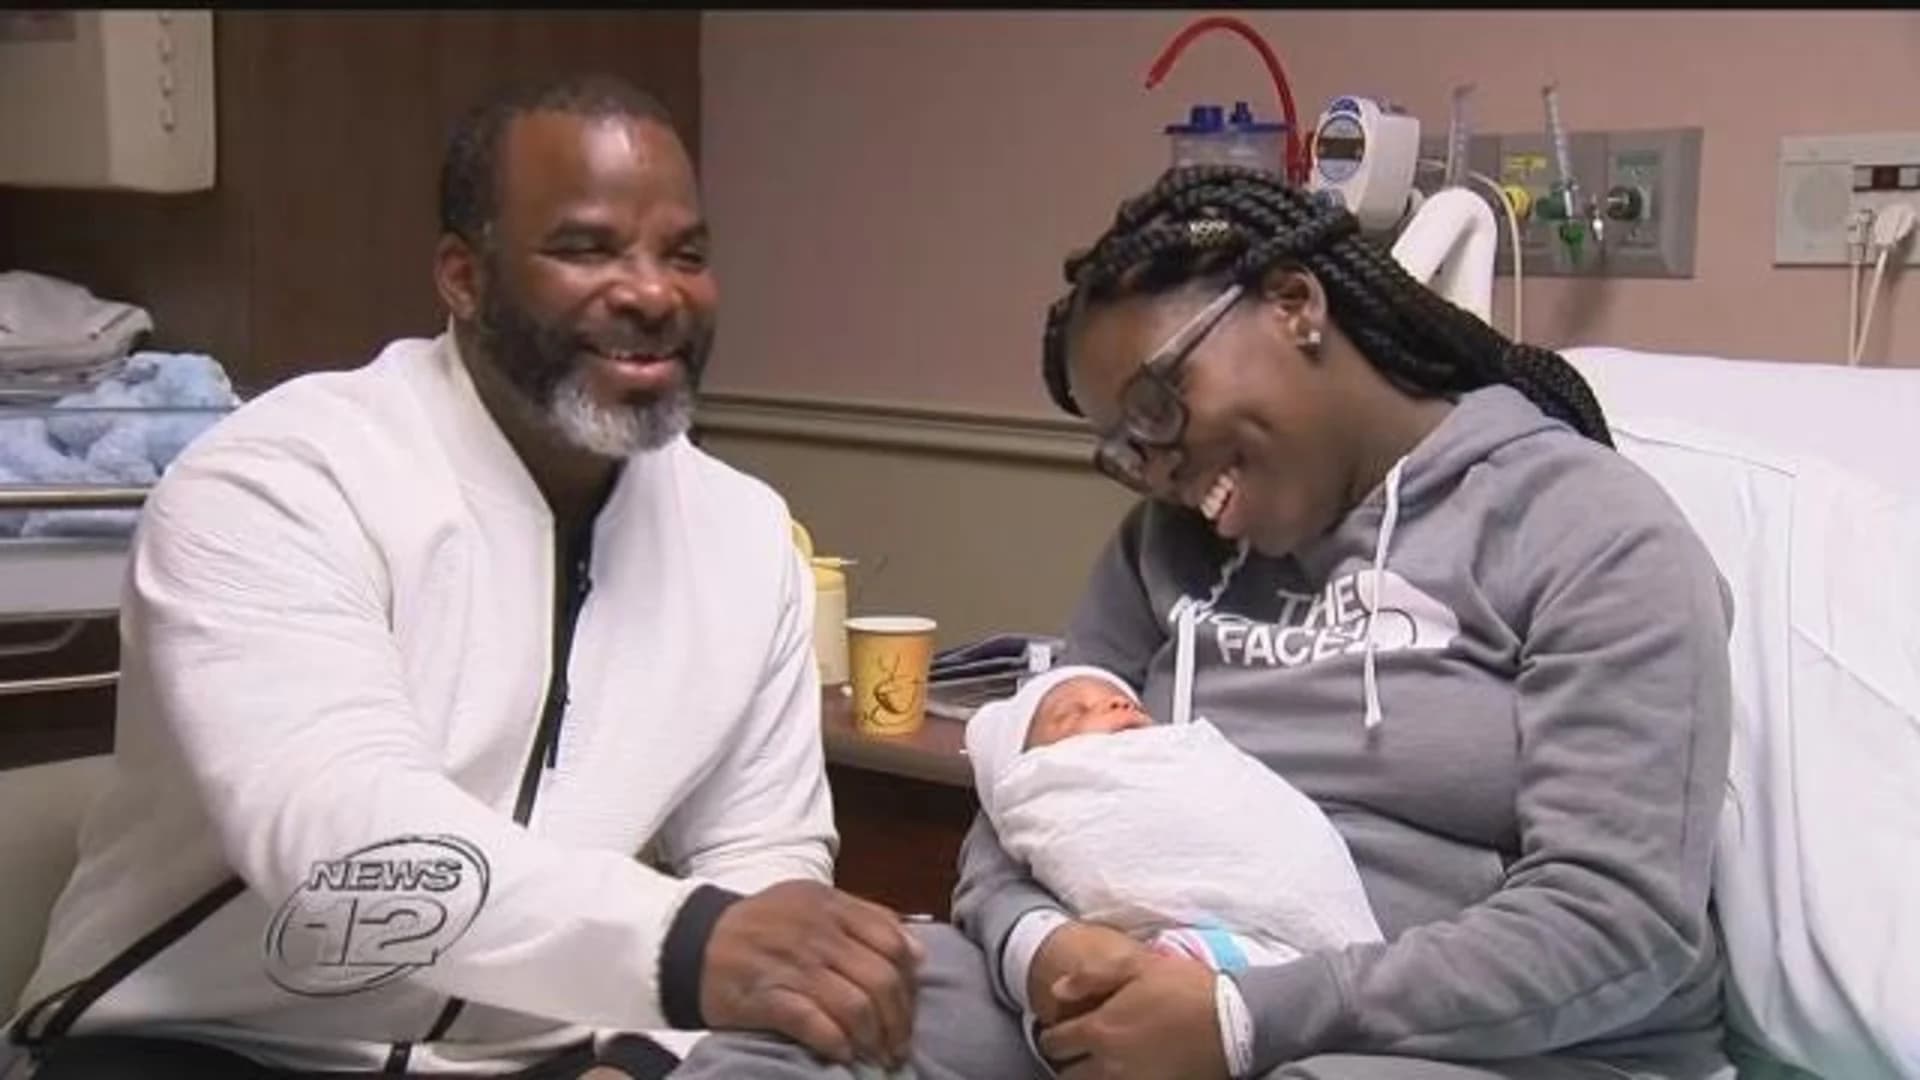 Cops force way into apartment to help mom who just had baby